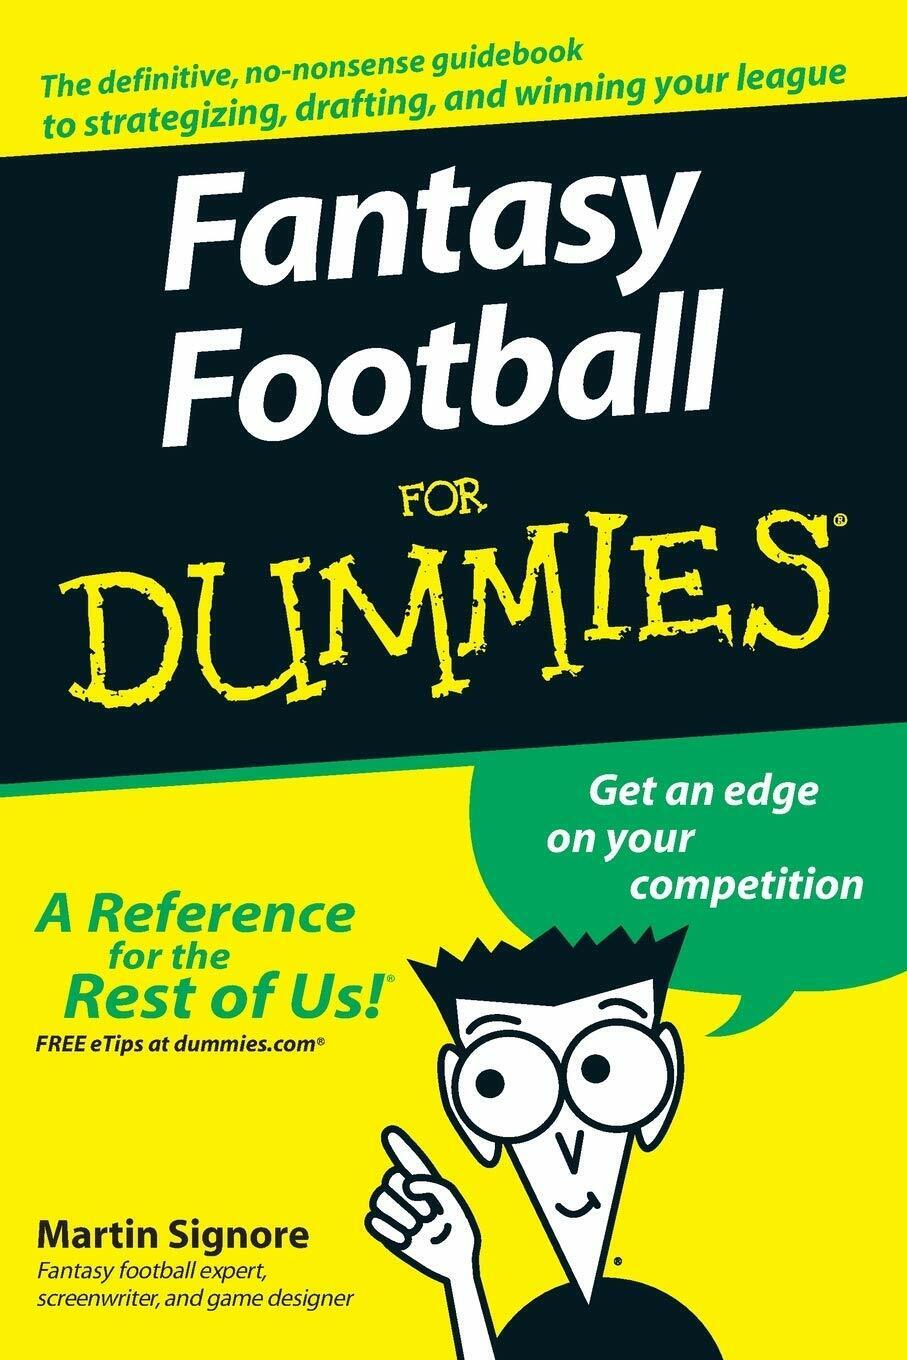 Fantasy Football for Dummies - Martin Signore -  John Wiley & Sons, 2007